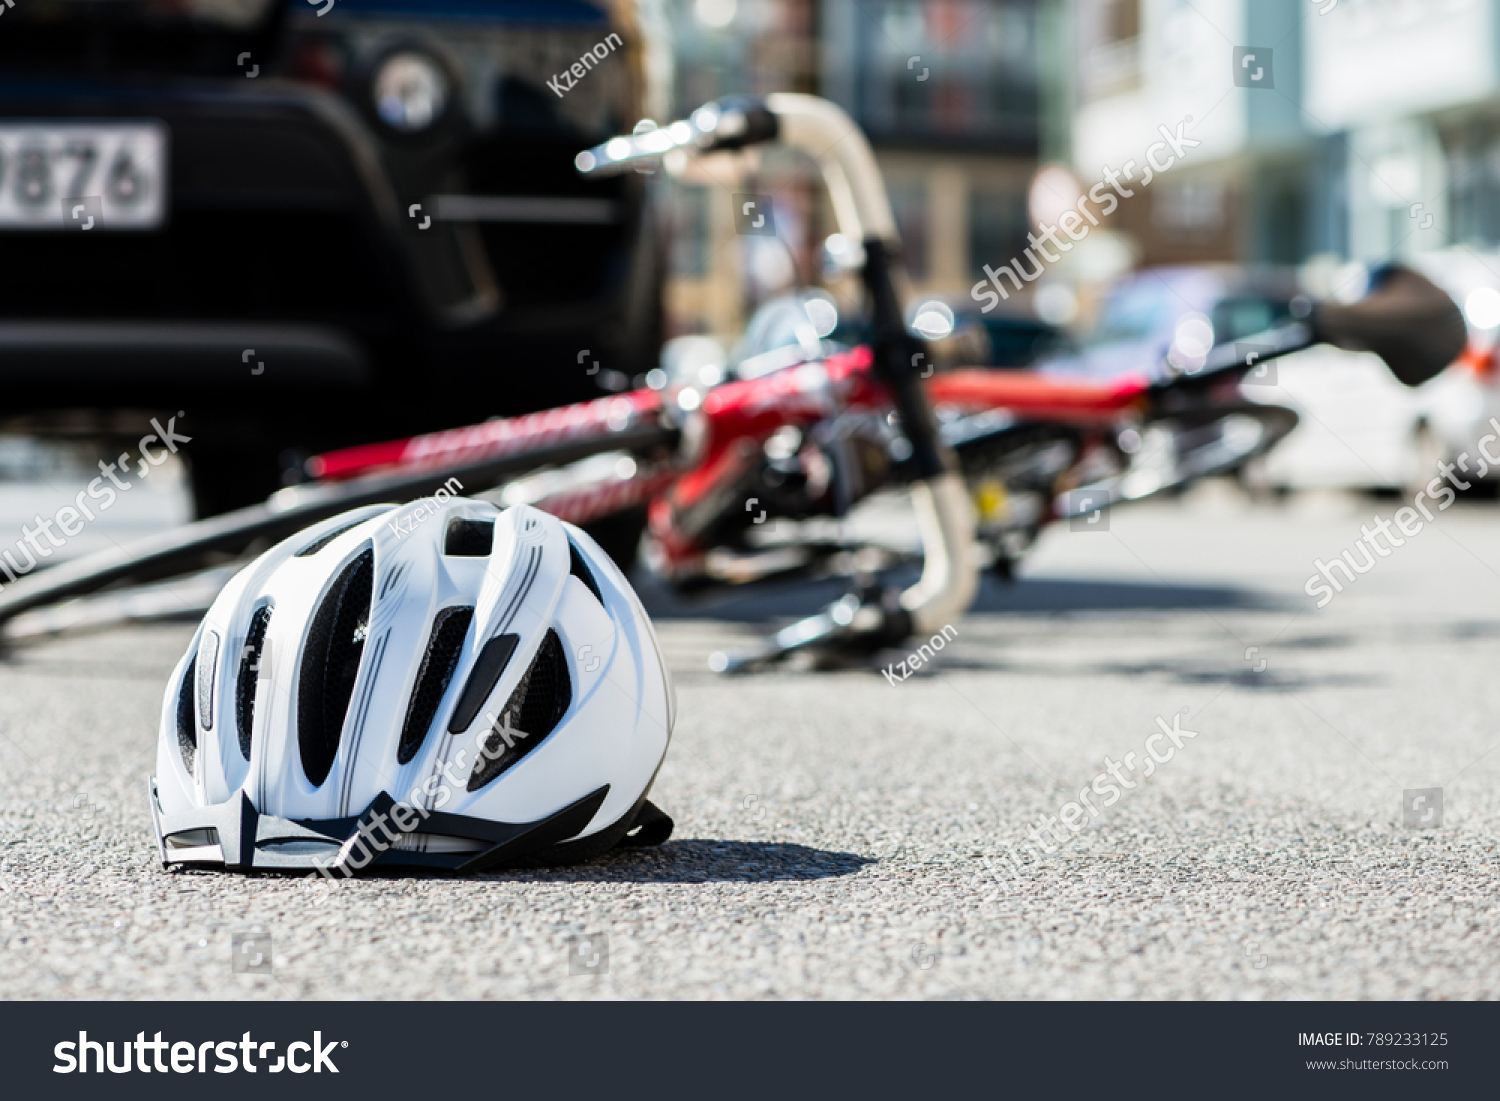 Close-up of a bicycling helmet fallen on the asphalt  next to a bicycle after car accident on the street in the city #789233125